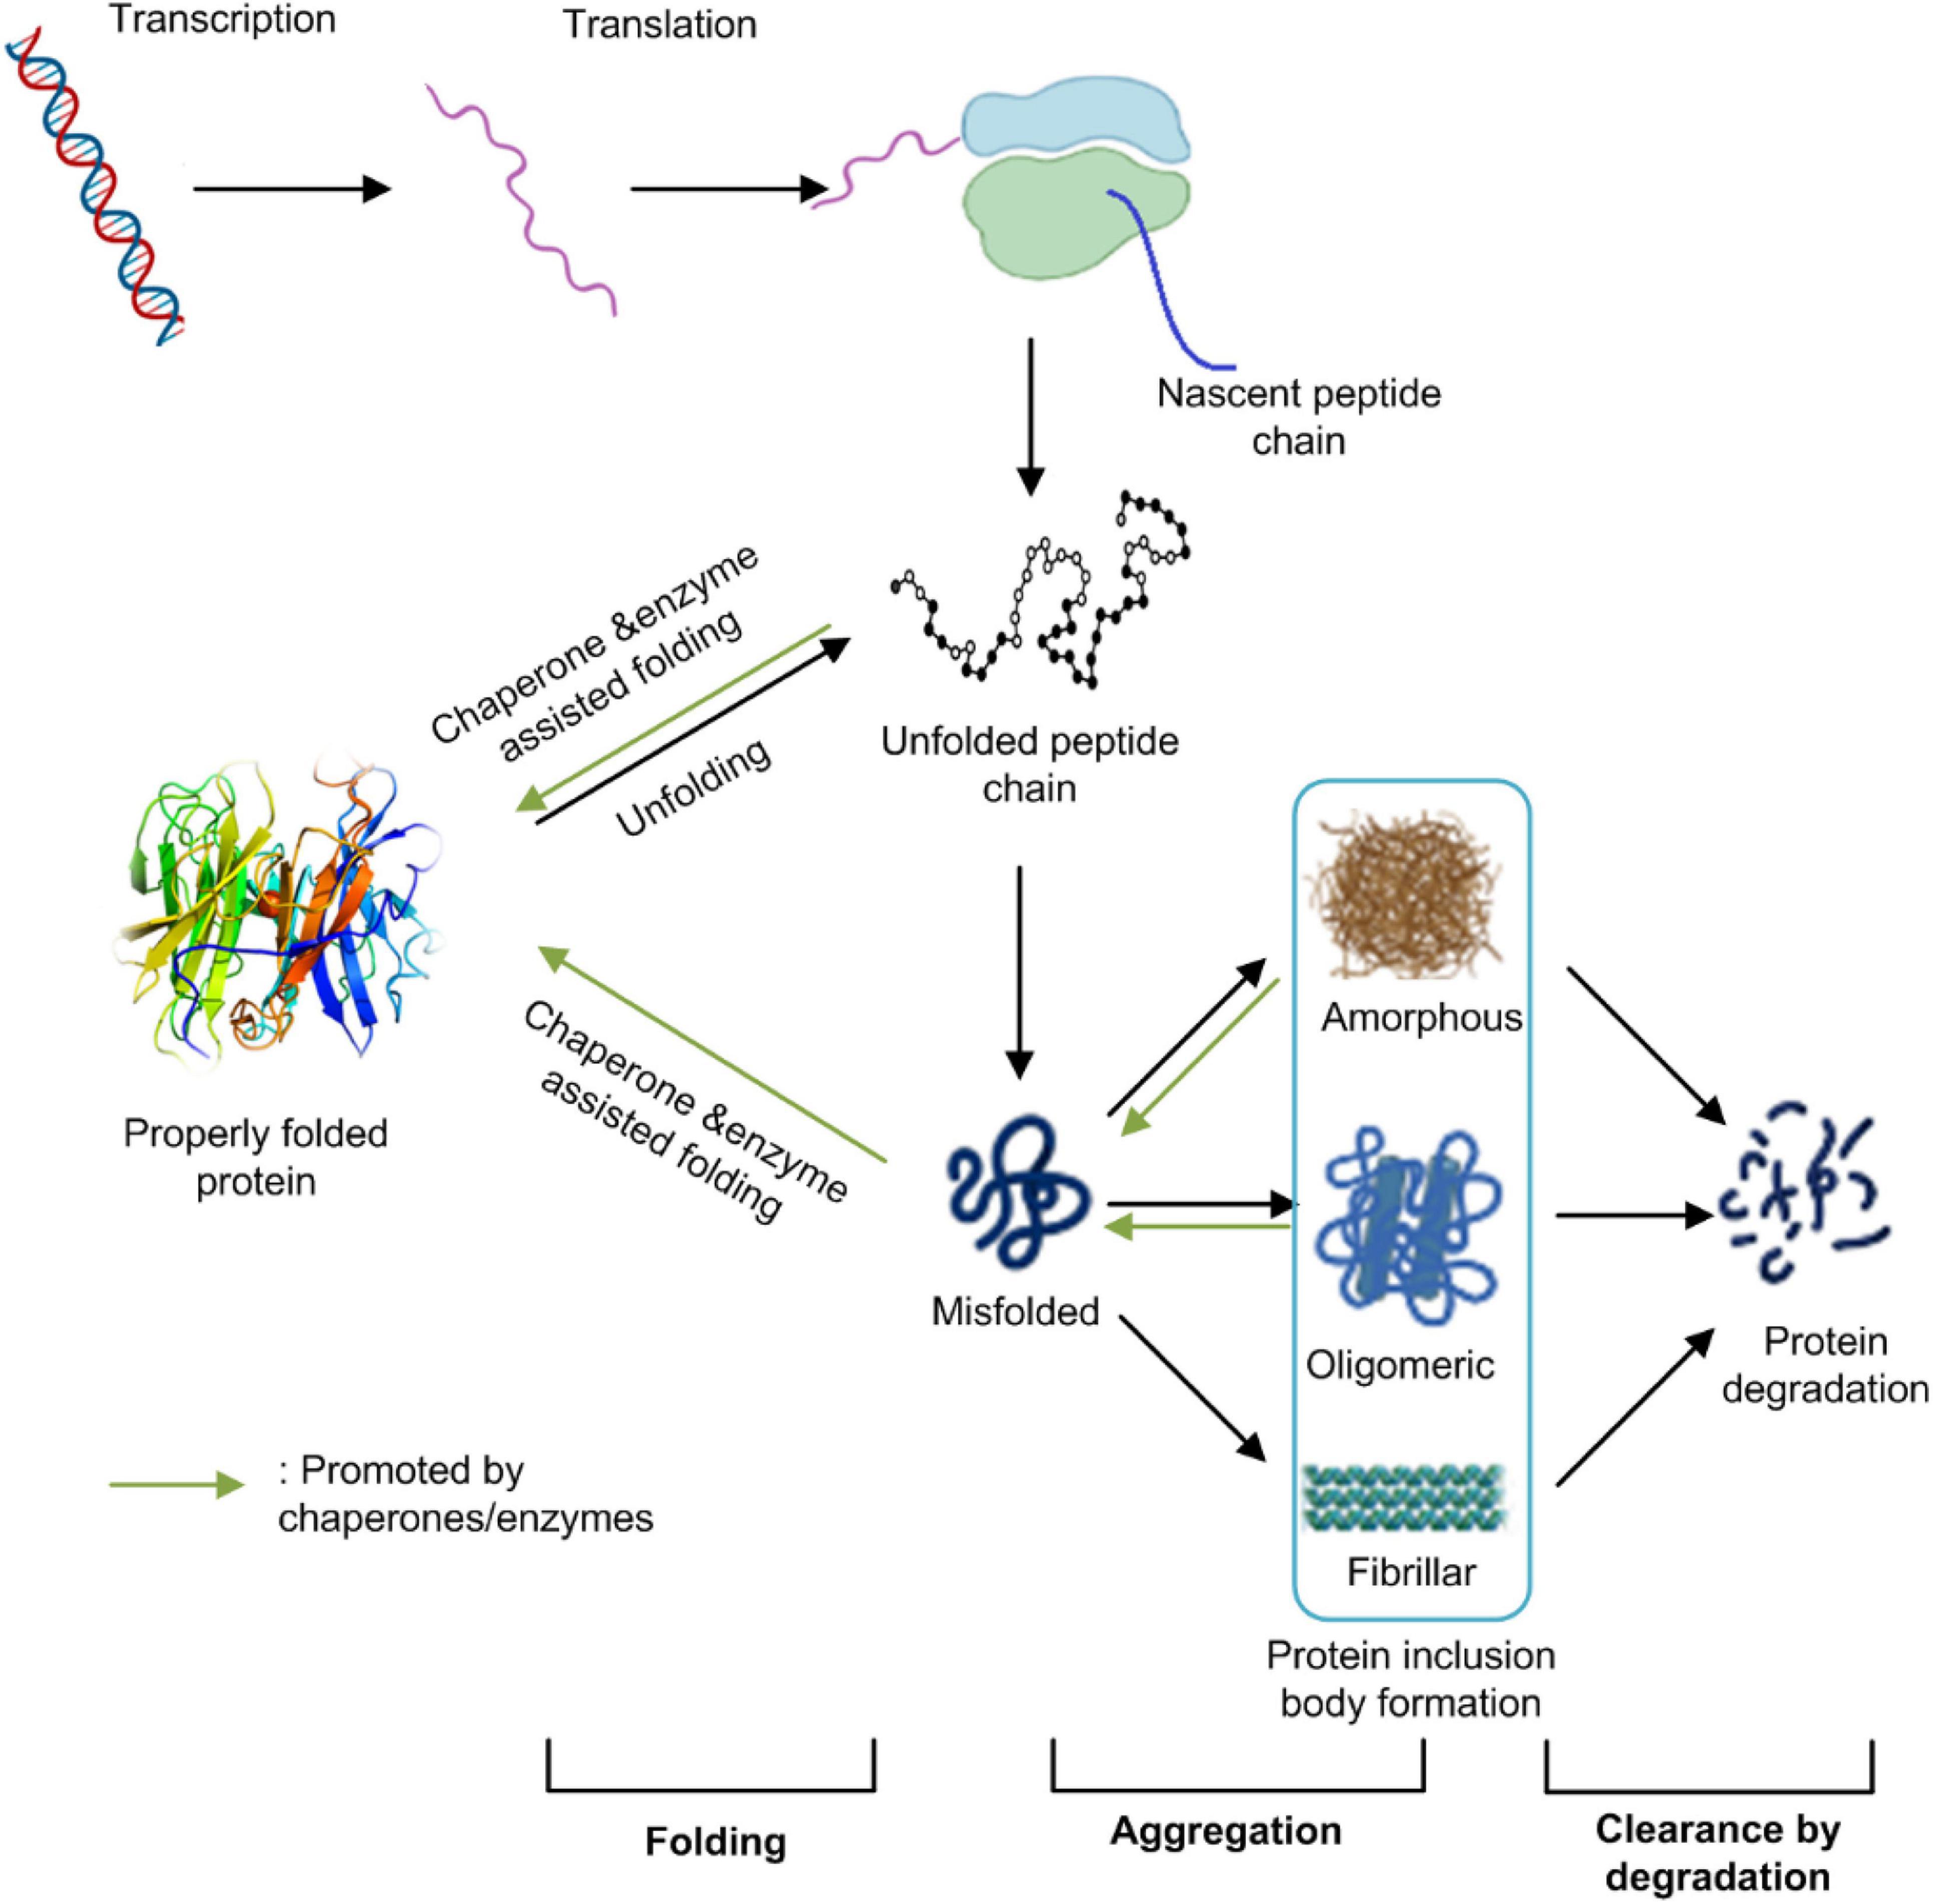 Frontiers Challenges Associated With The Formation Of Recombinant Protein Inclusion Bodies In Escherichia Coli And Strategies To Address Them For Industrial Applications Bioengineering And Biotechnology